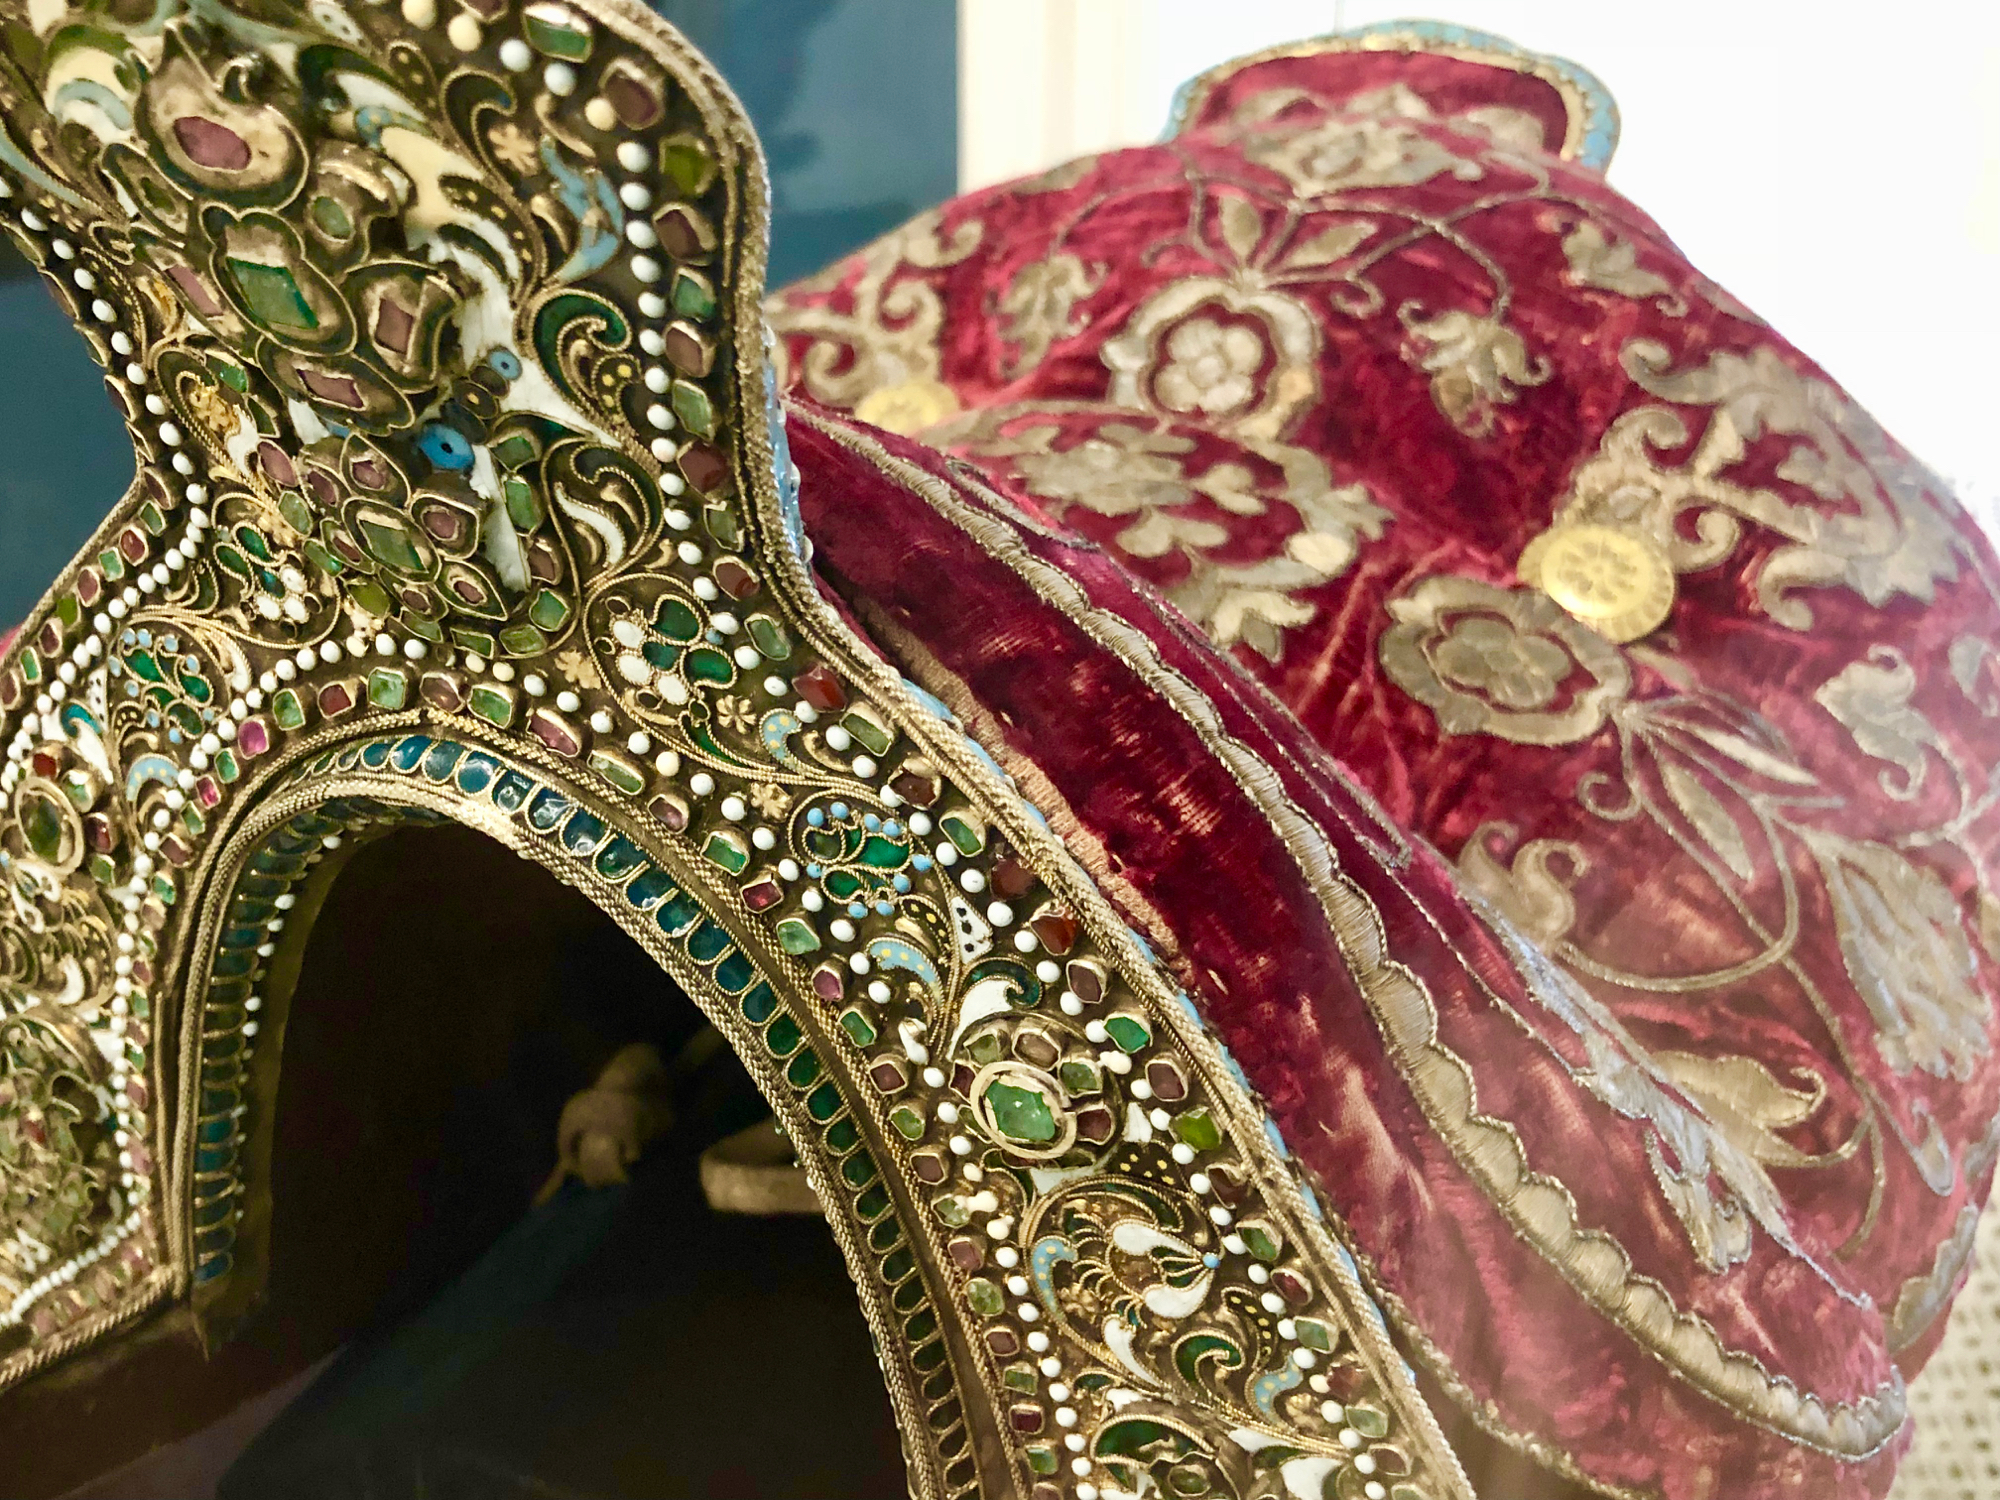 Royal Saddle in the National Museum